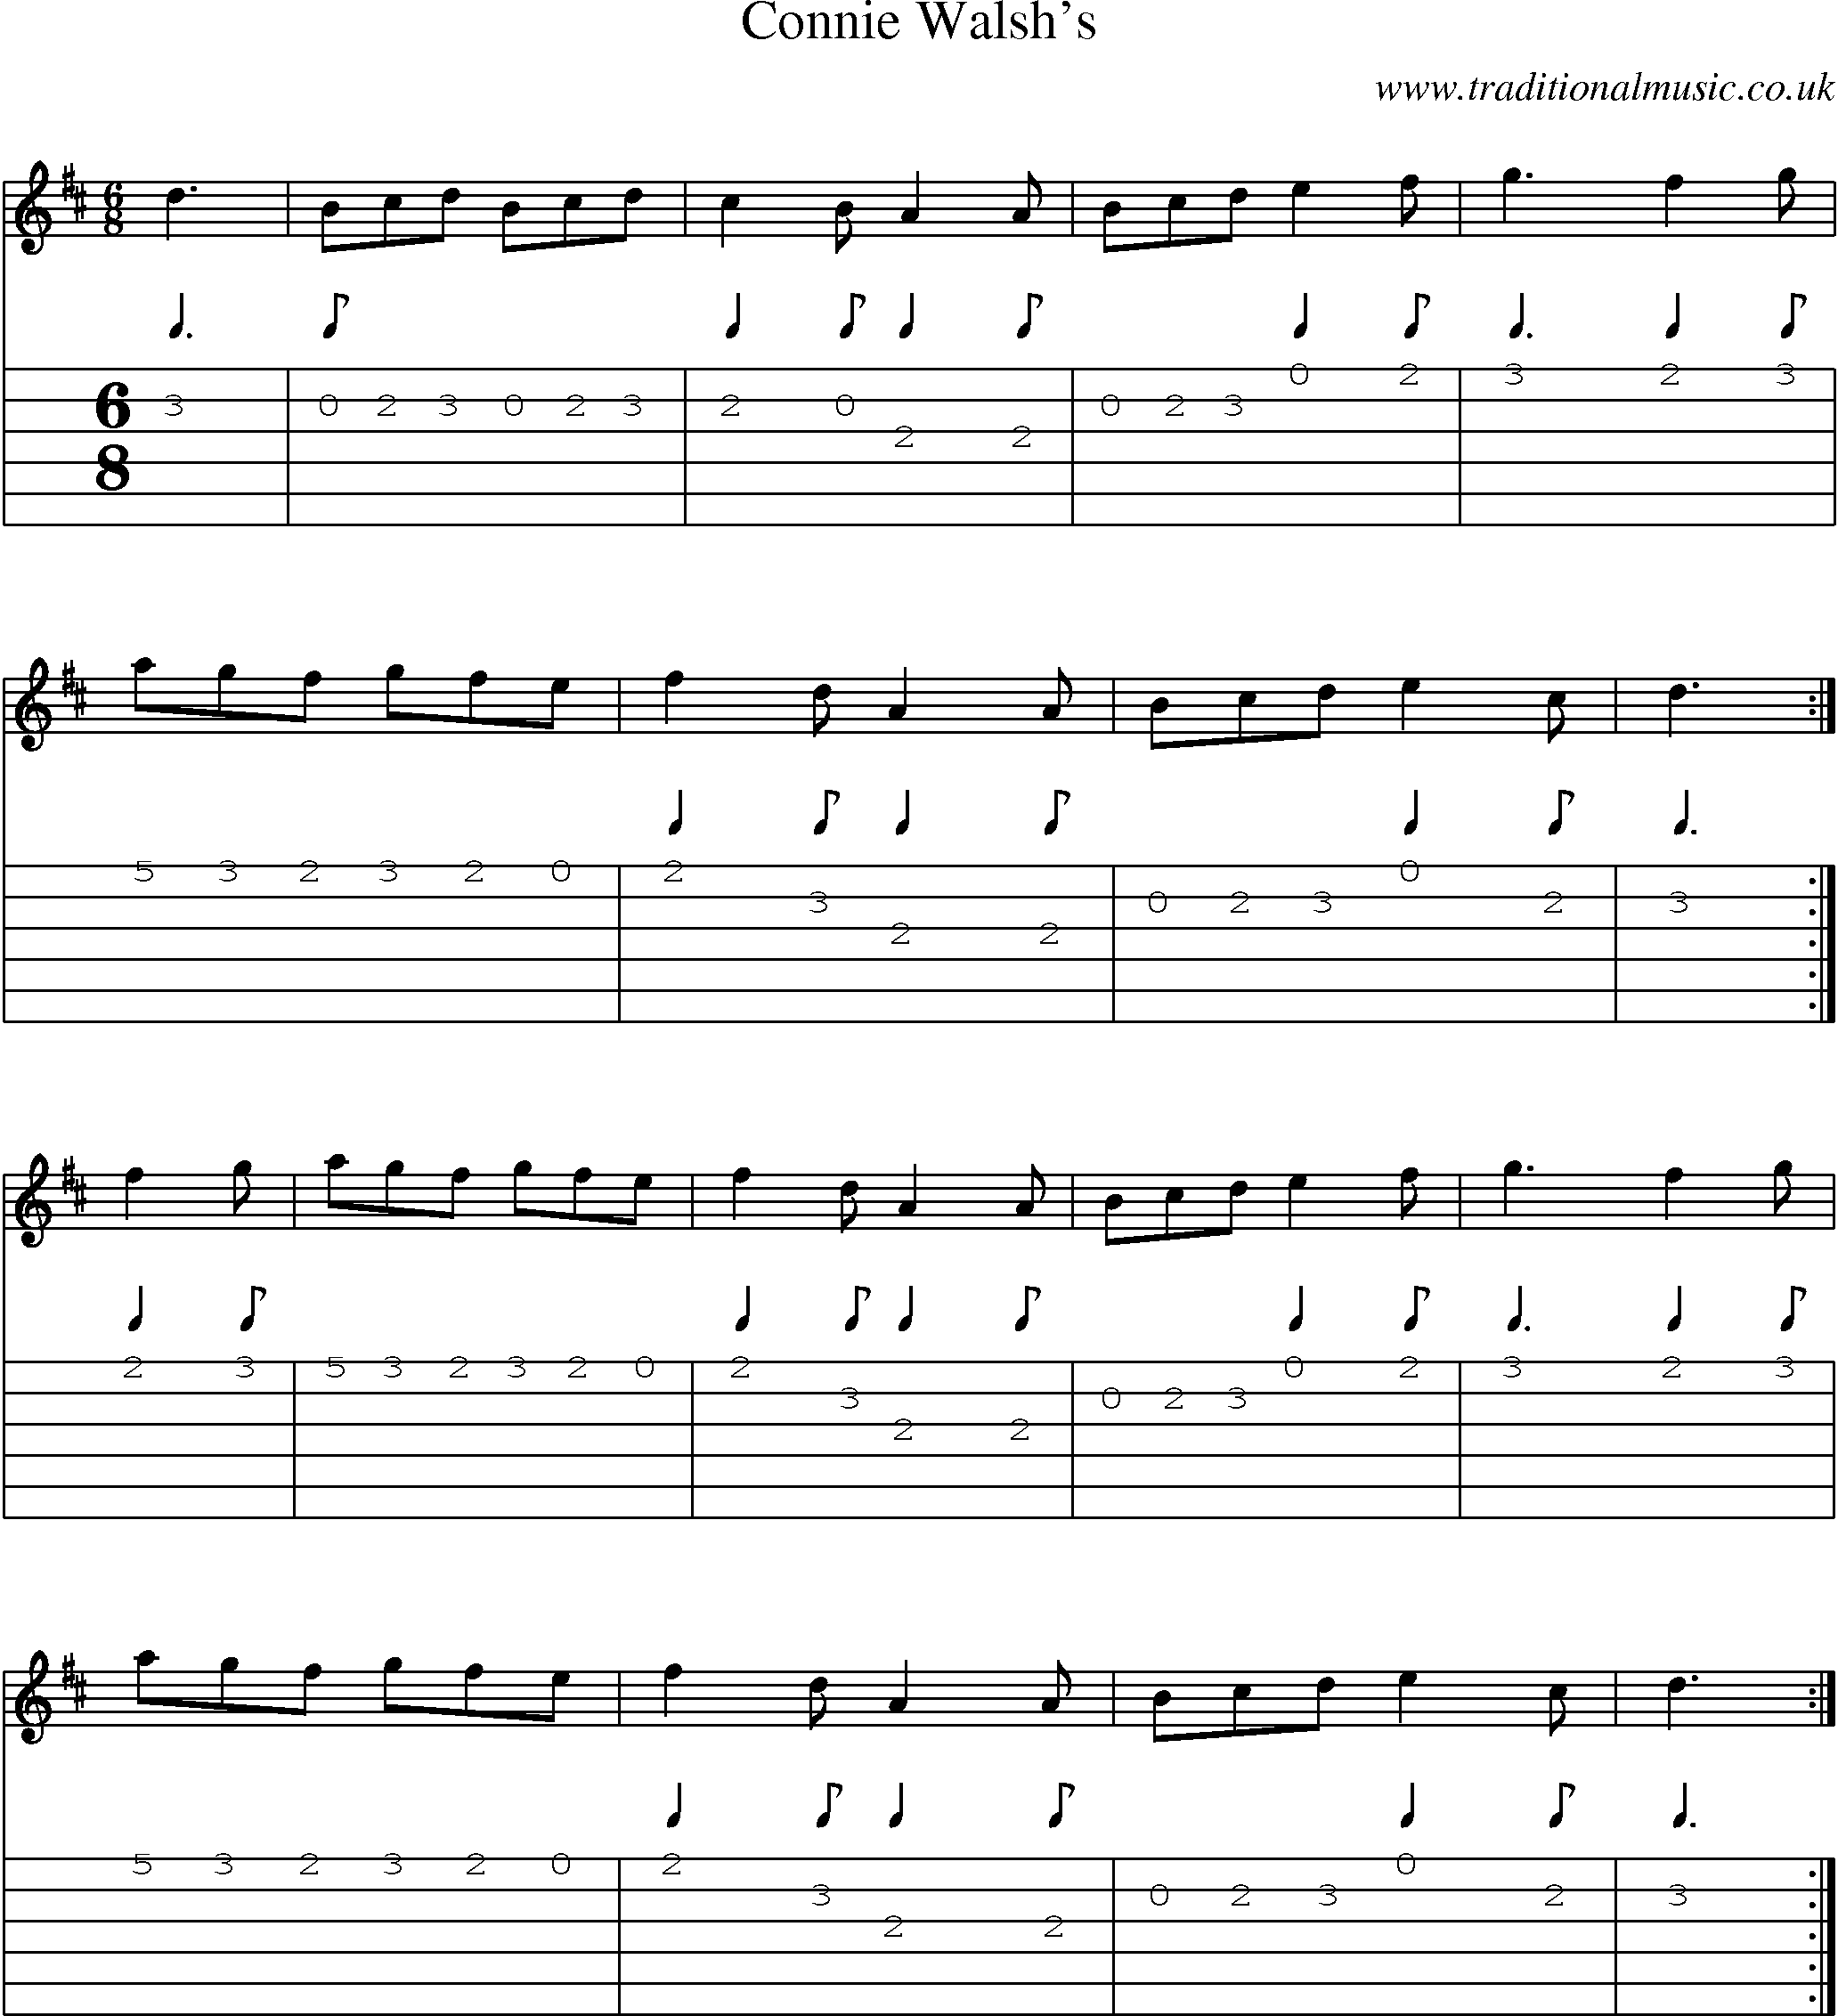 Music Score and Guitar Tabs for Connie Walshs